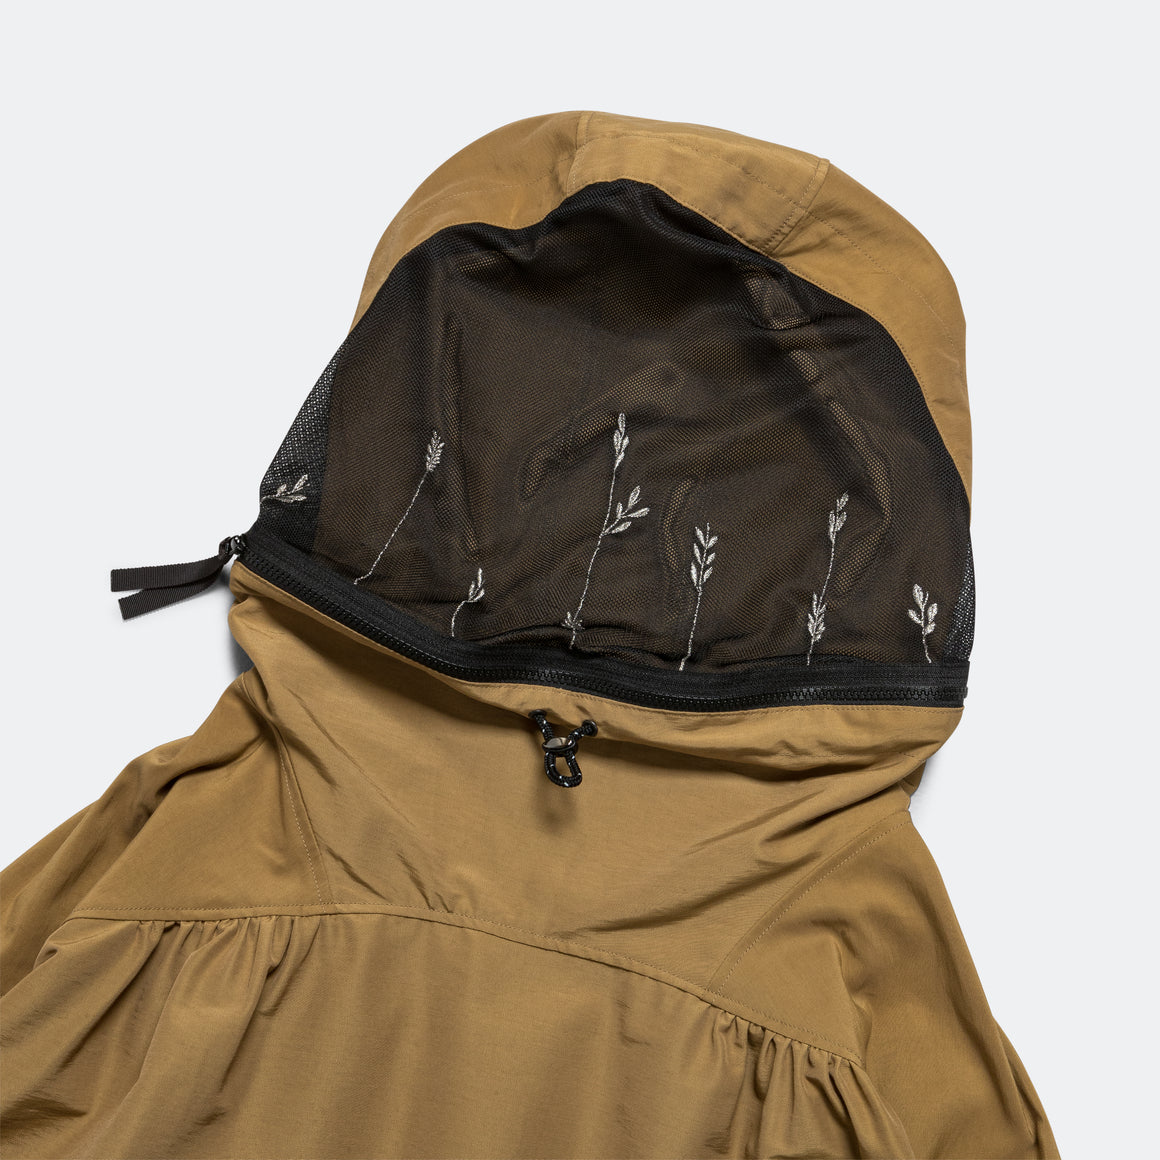 Kapital - 60/40 Cloth BUG Anorak (2Tones) - Gold/Beige - UP THERE